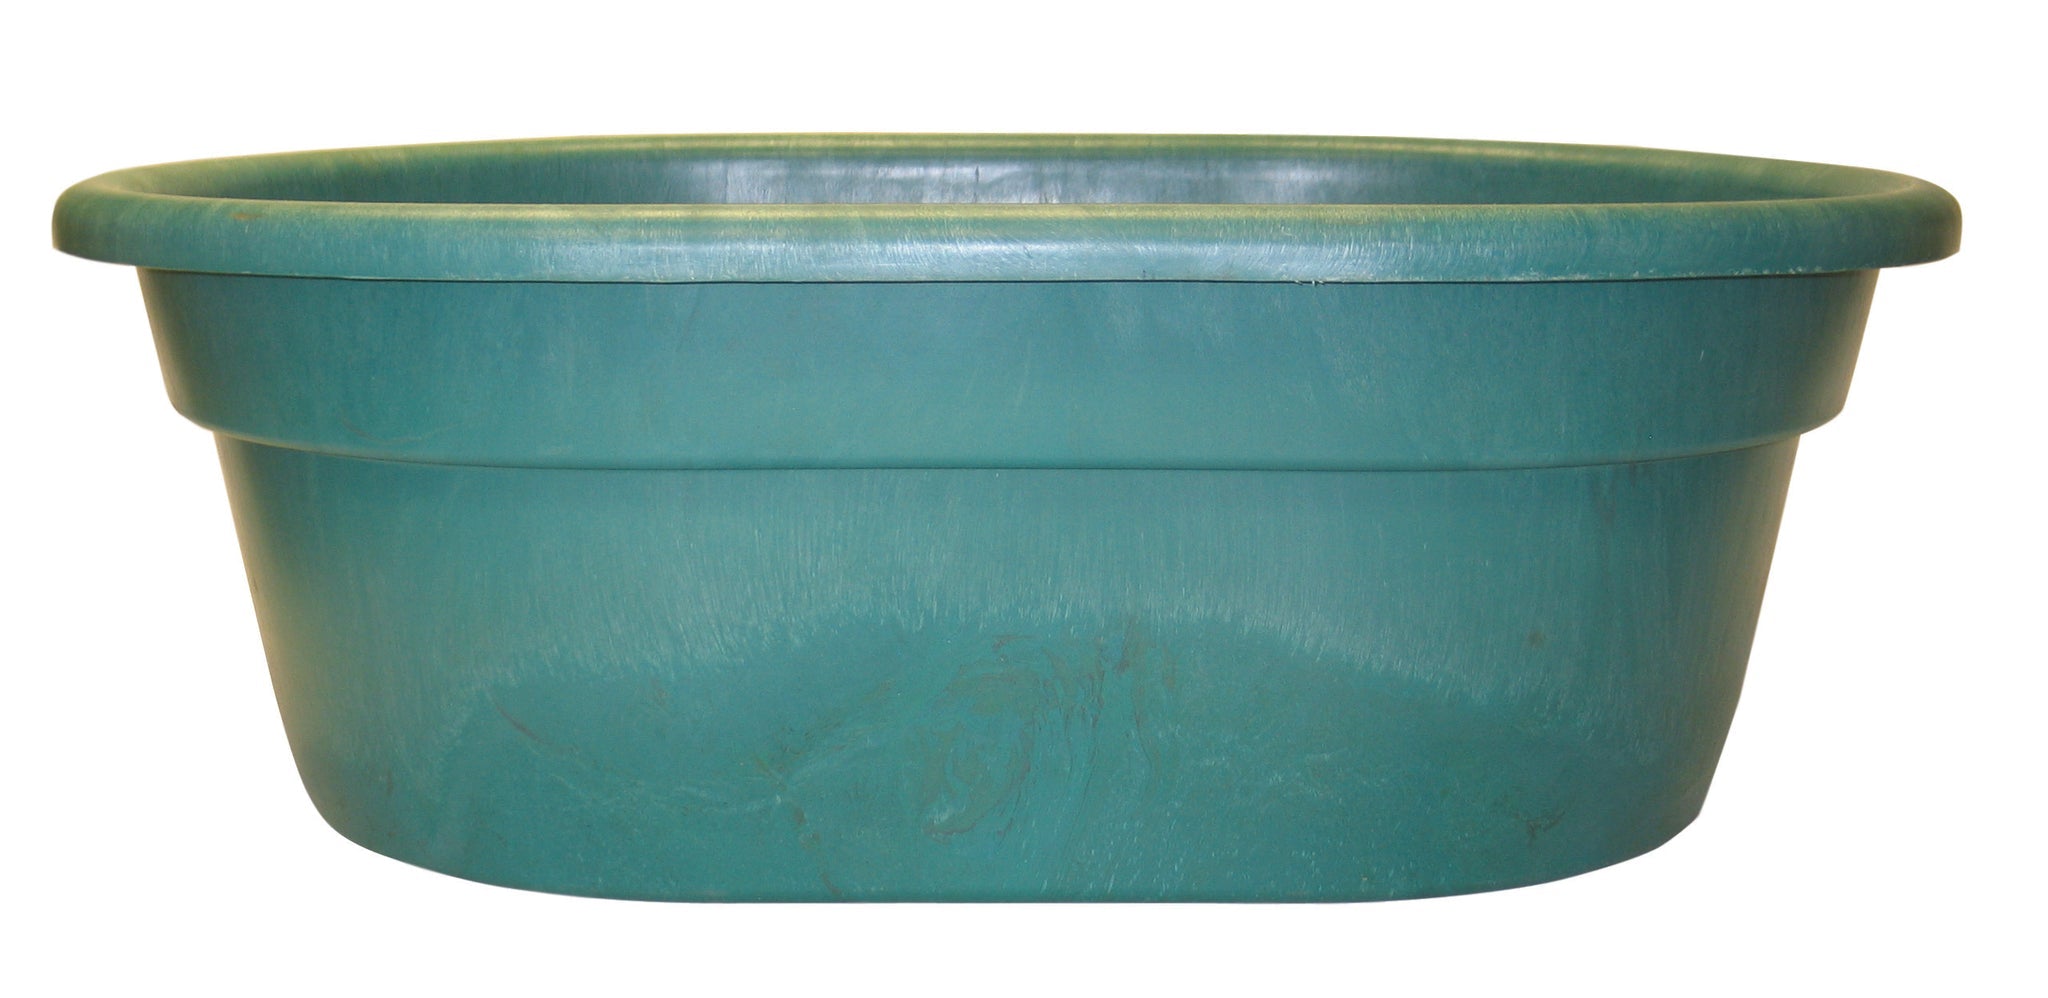 PROMO TUB RUBBER 30GAL. OVAL